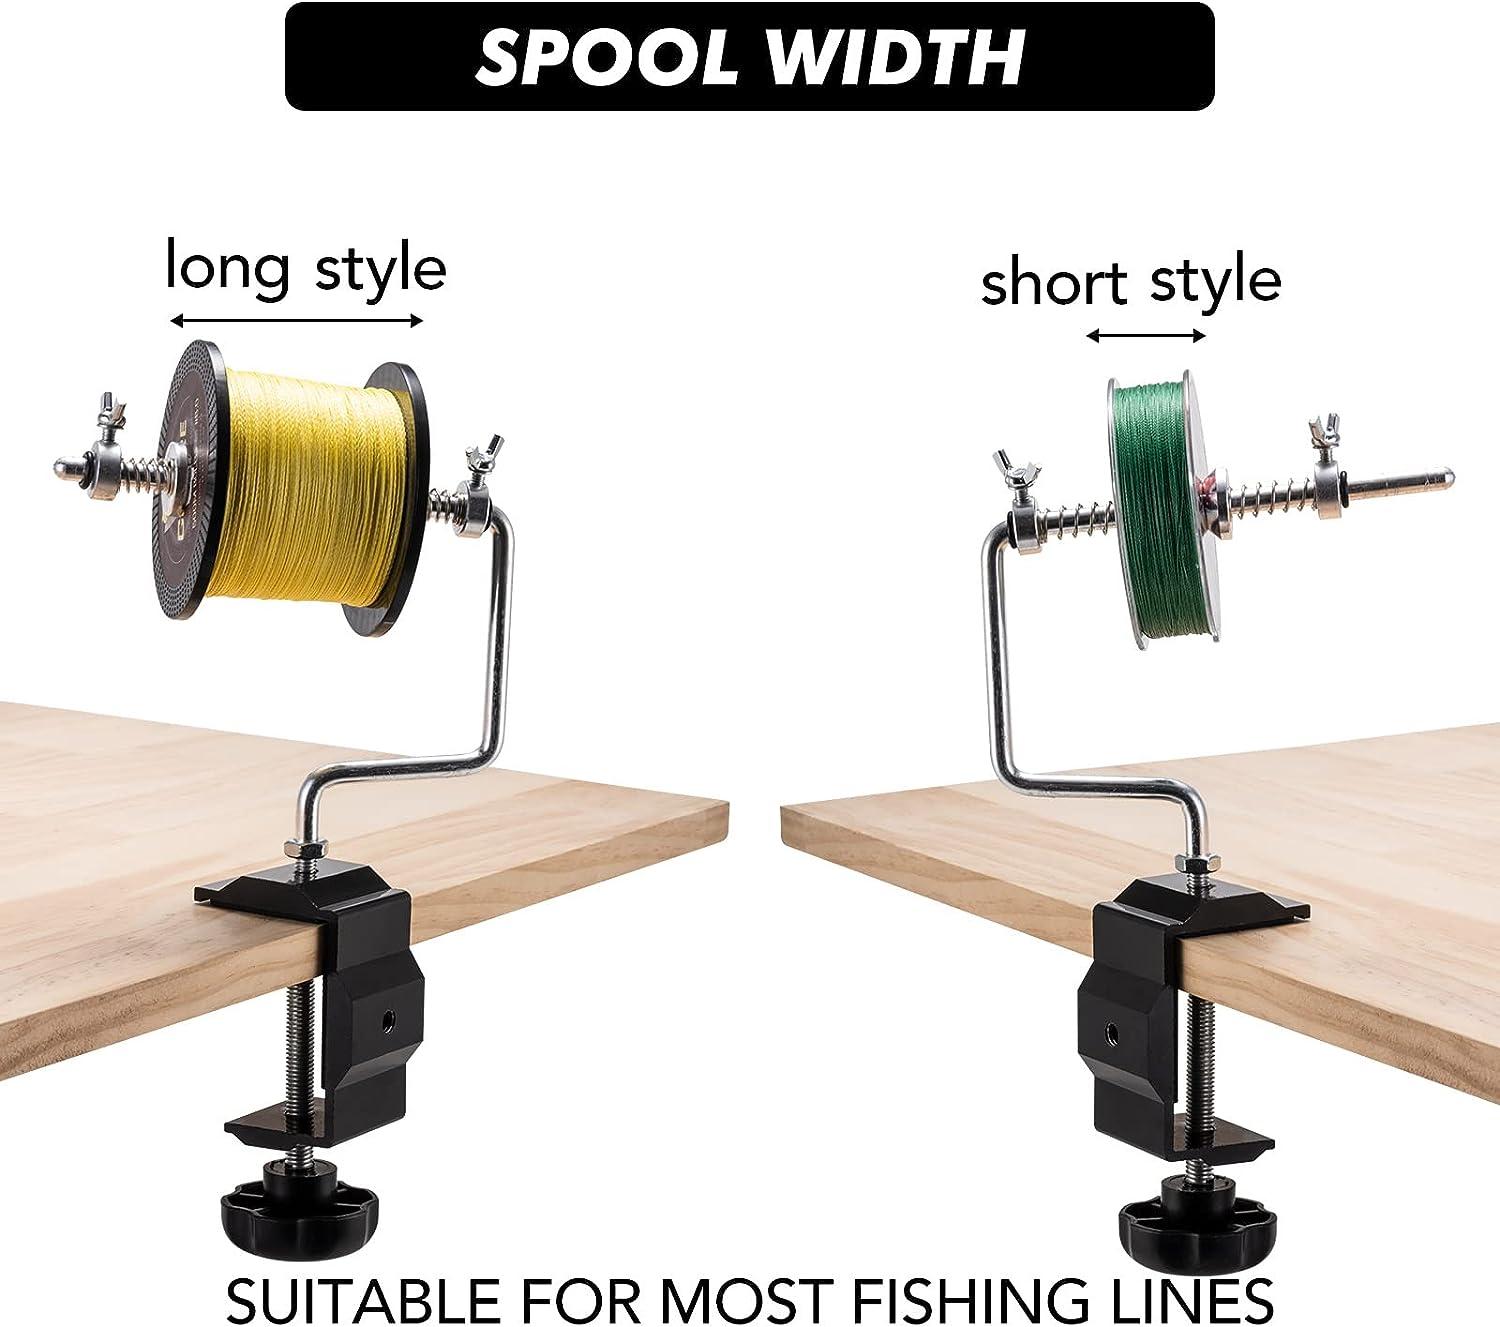 Fishing Tackle Tools Accessories